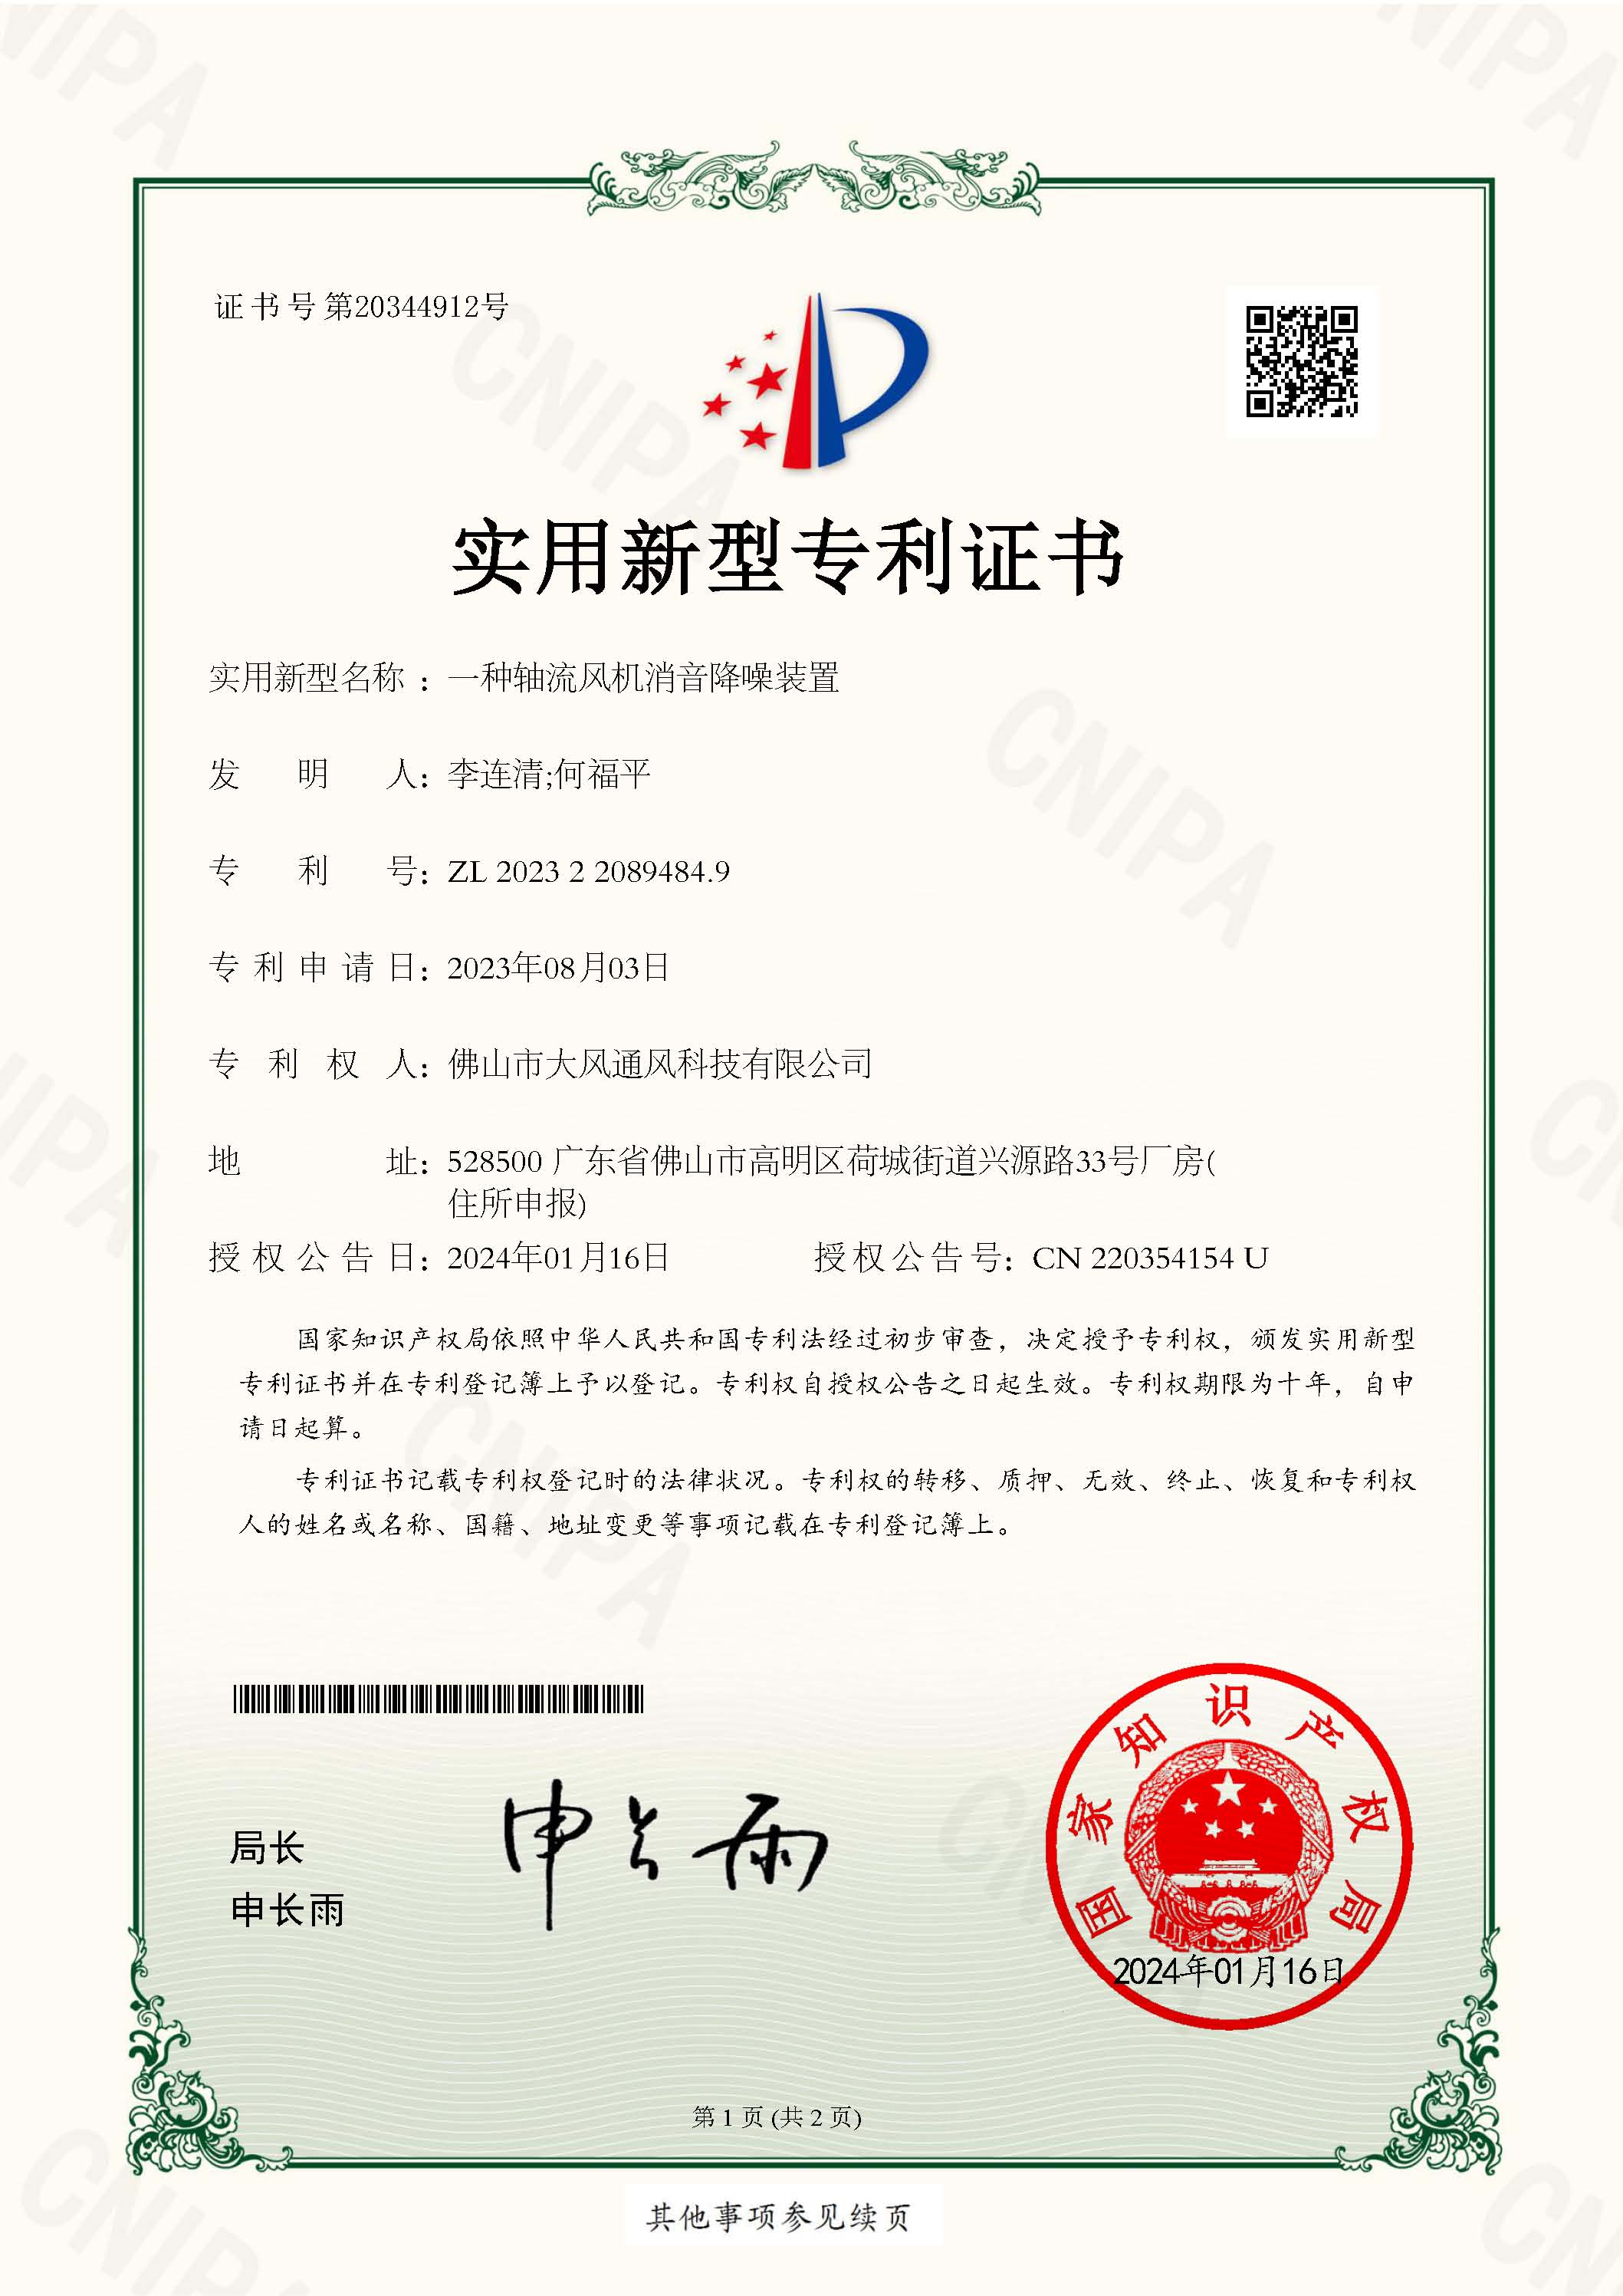 Congratulations to DAFENG for Utility Model Patent Certificate: A Silencing and Noise Reduction Device for Axial Flow Fans